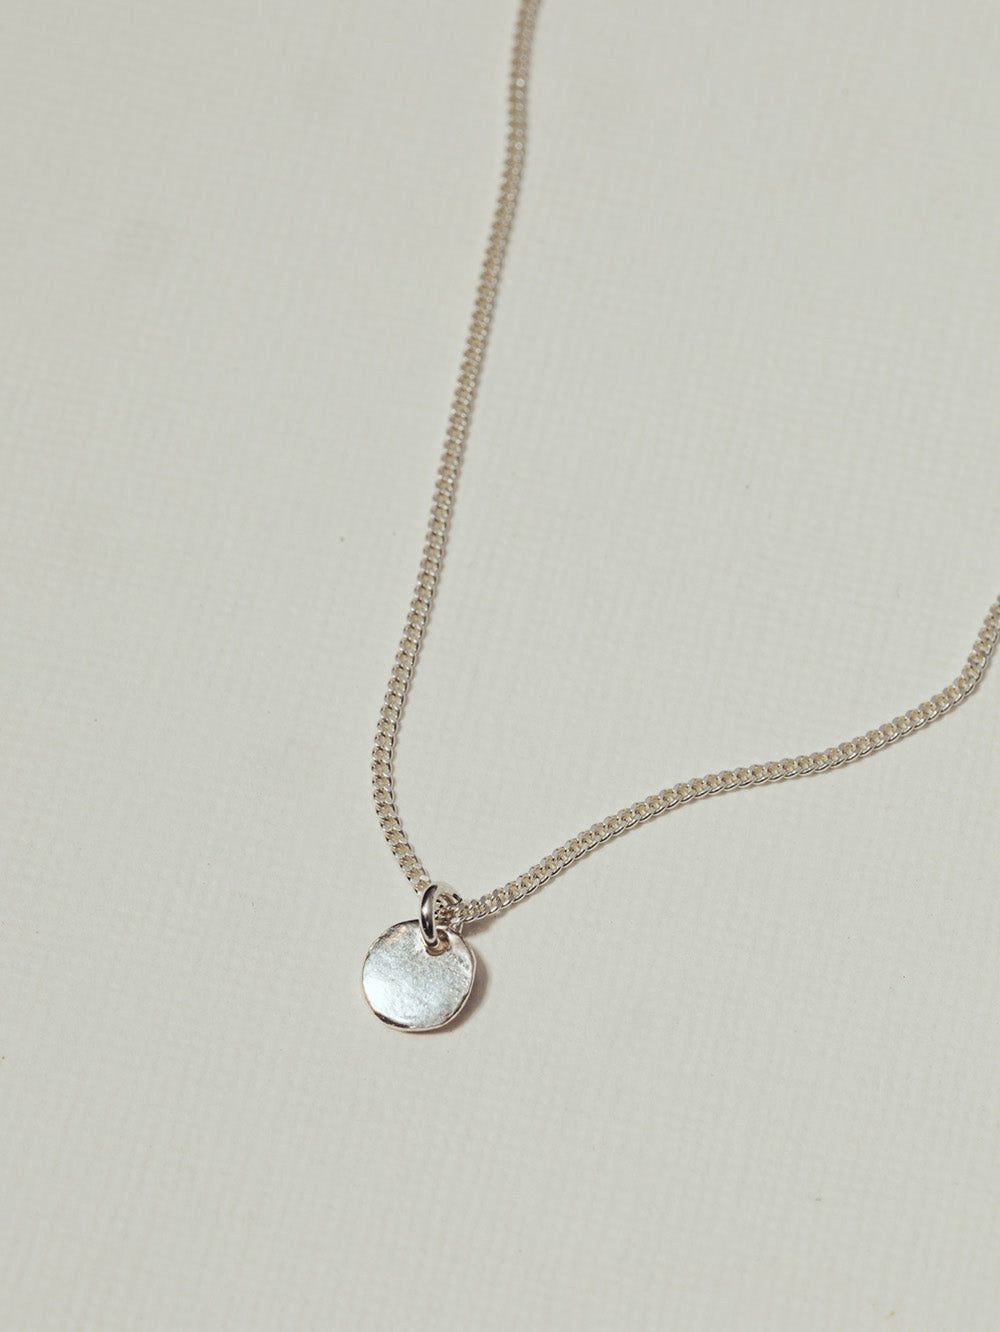 Full moon S | 925 Sterling Silver